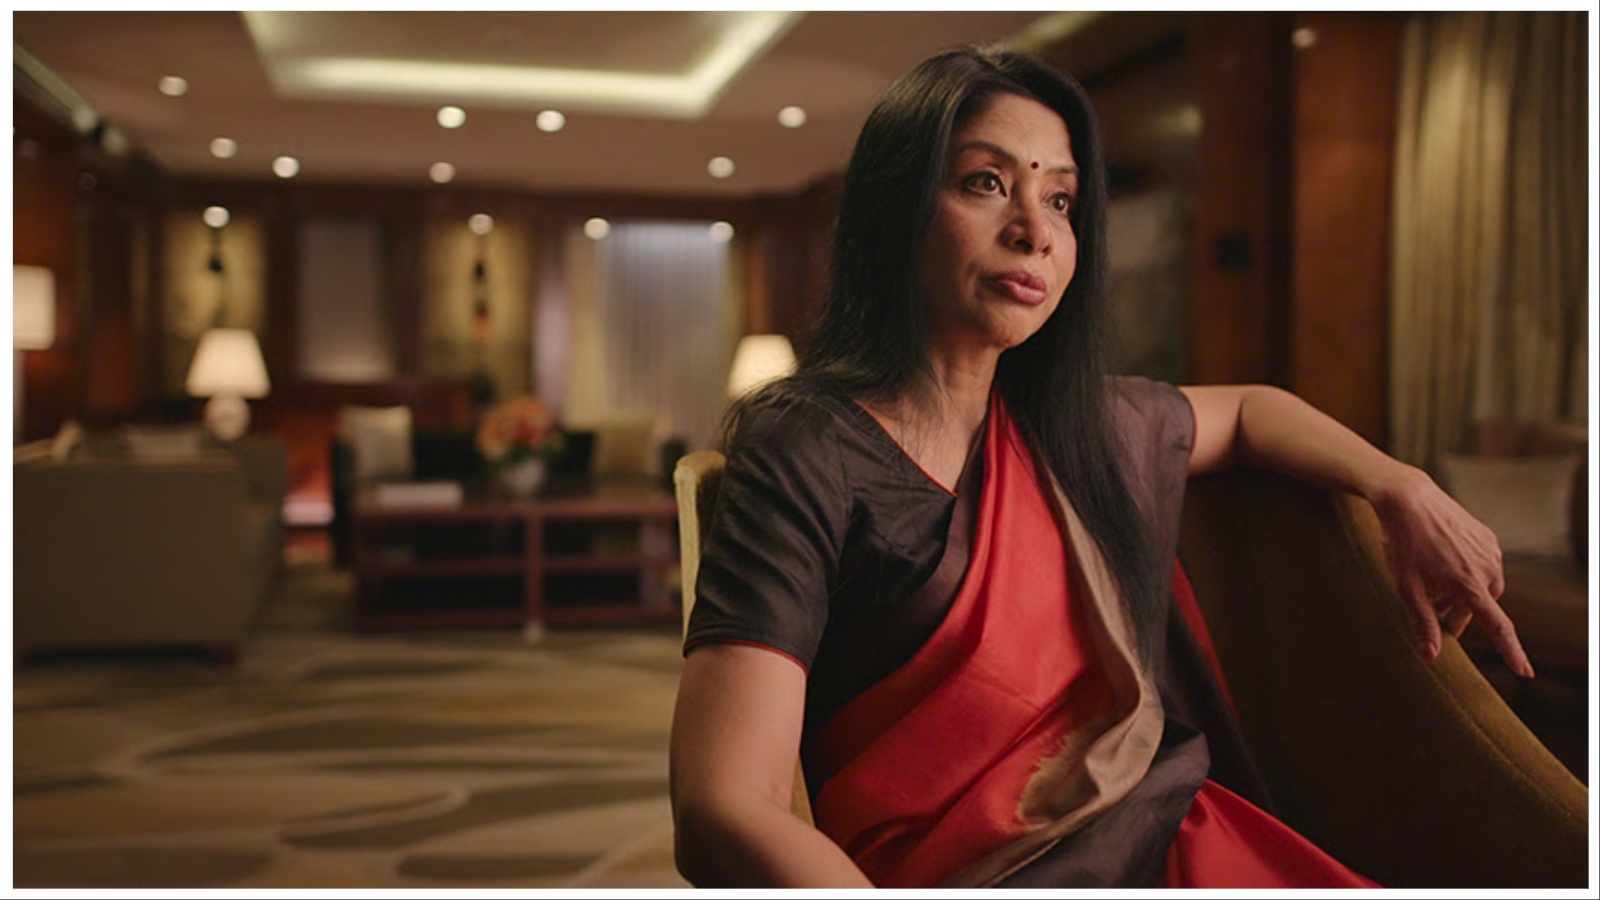 android, the indrani mukerjea story – buried truth review: snarky but not salacious, netflix’s true crime series examines sheena bora case with uncommon sensitivity